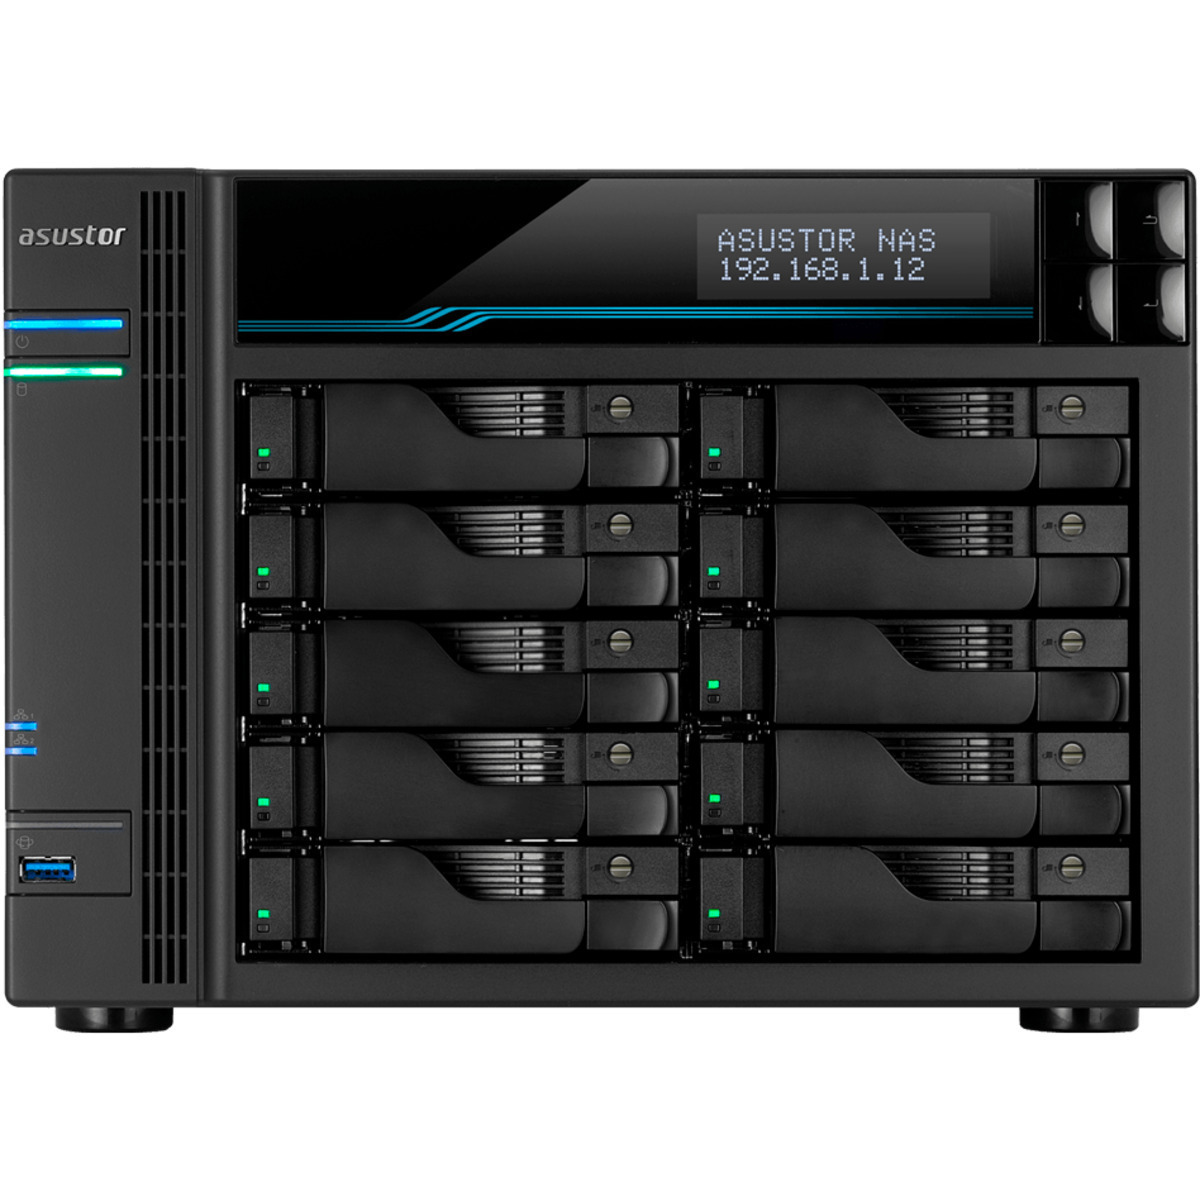 ASUSTOR AS7110T Lockerstor 10 Pro 132tb 10-Bay Desktop Multimedia / Power User / Business NAS - Network Attached Storage Device 6x22tb Western Digital Ultrastar HC580 SED WUH722422ALE6L1 3.5 7200rpm SATA 6Gb/s HDD ENTERPRISE Class Drives Installed - Burn-In Tested AS7110T Lockerstor 10 Pro